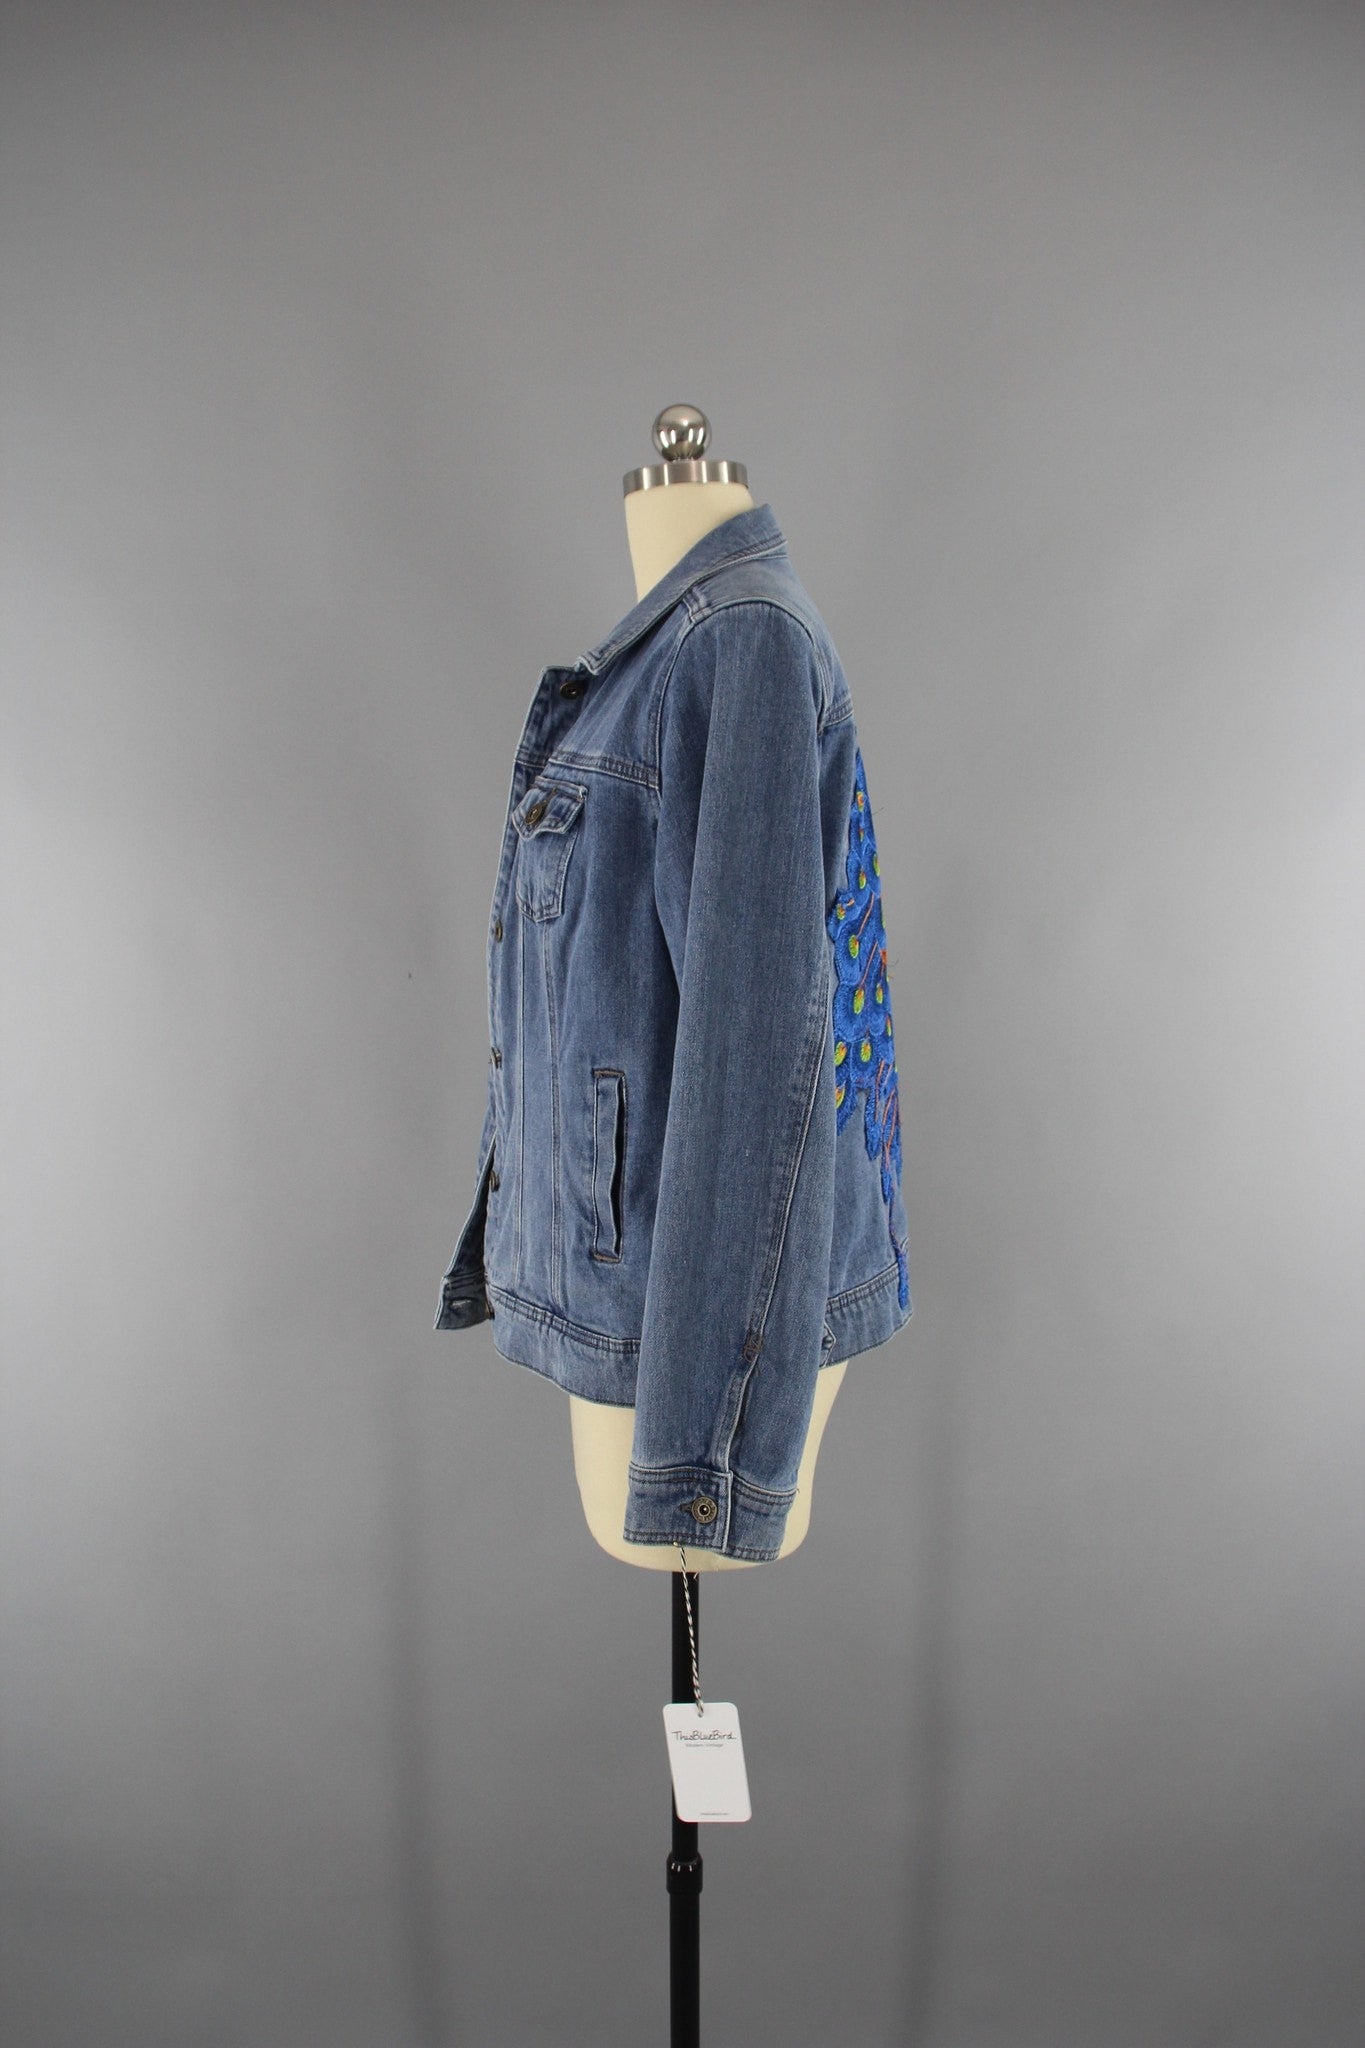 Vintage Style Denim Jacket with Royal Blue Peacock Embroidery - ThisBlueBird